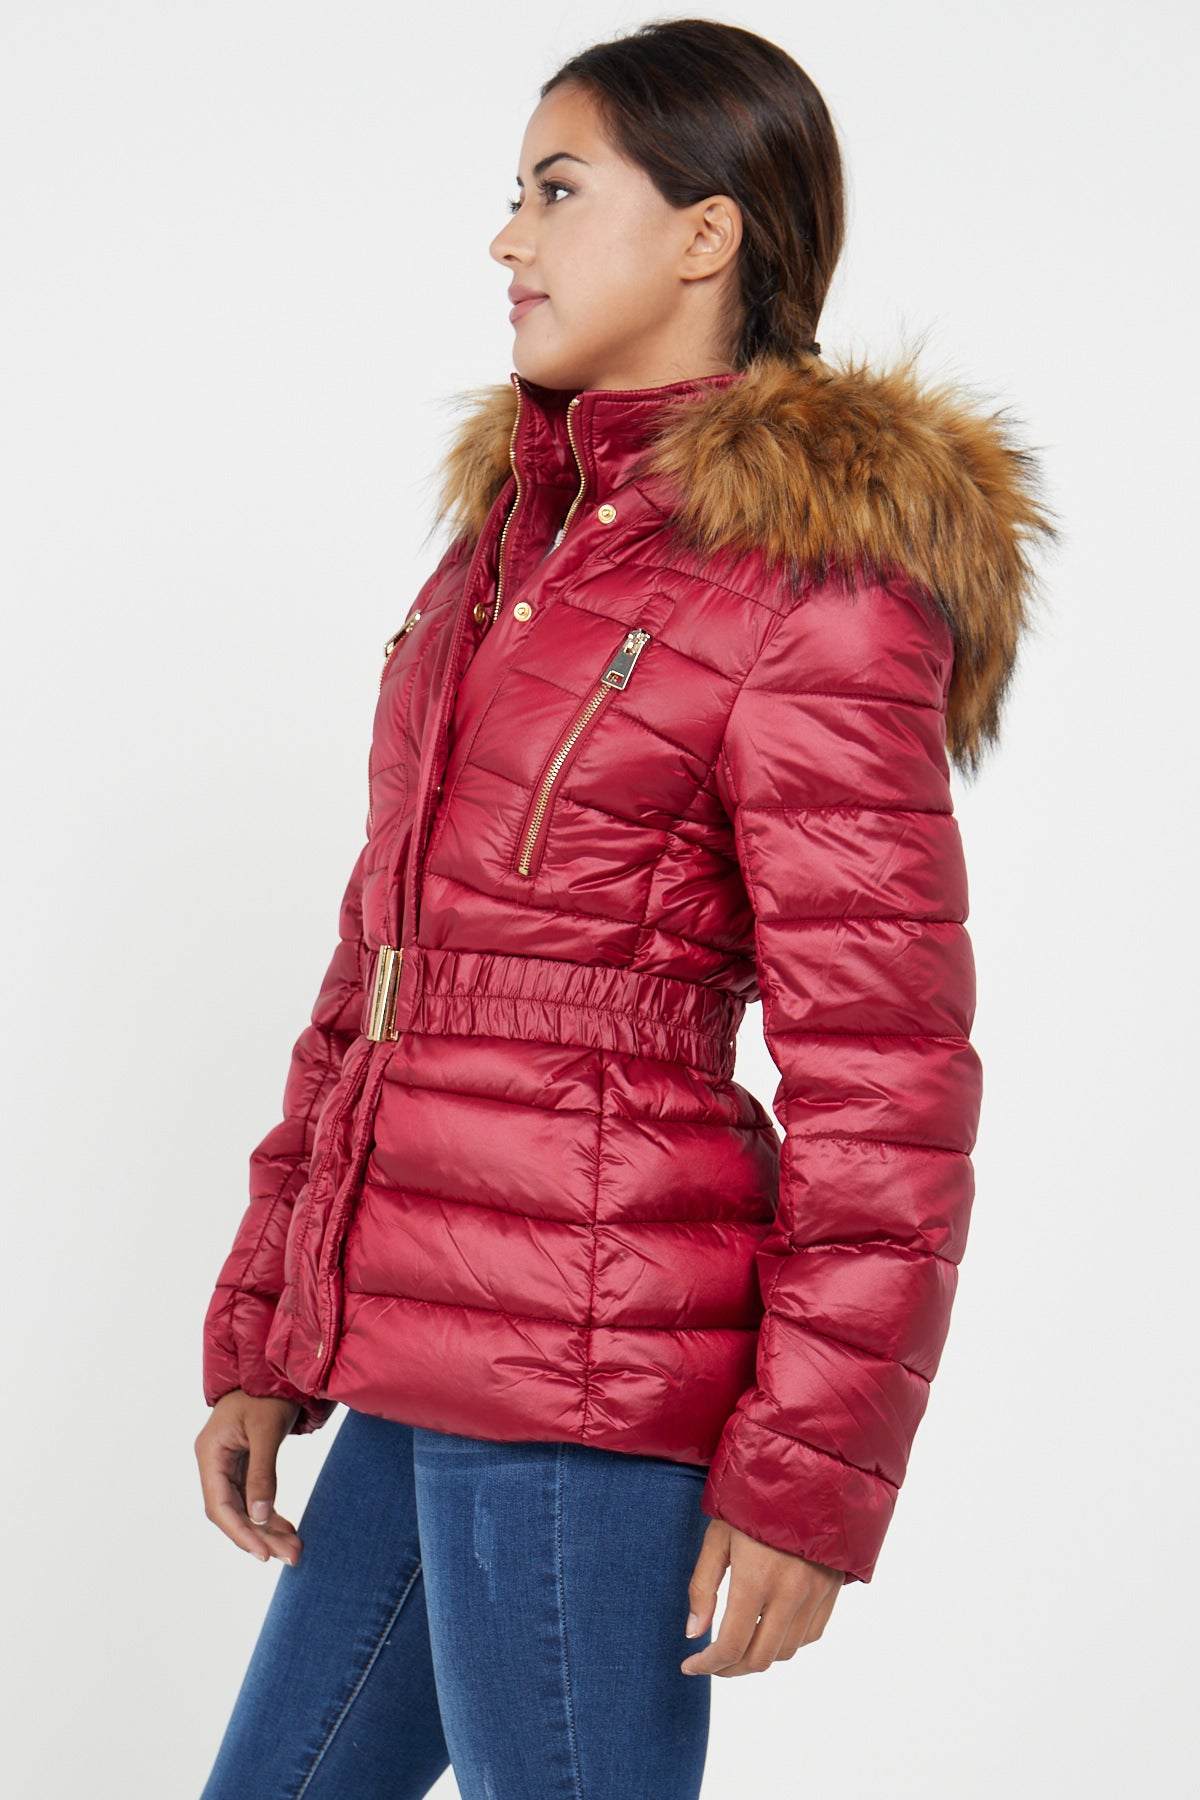 Love Sunshine Padded Jacket with Faux Fur Hood in Red LS-9027